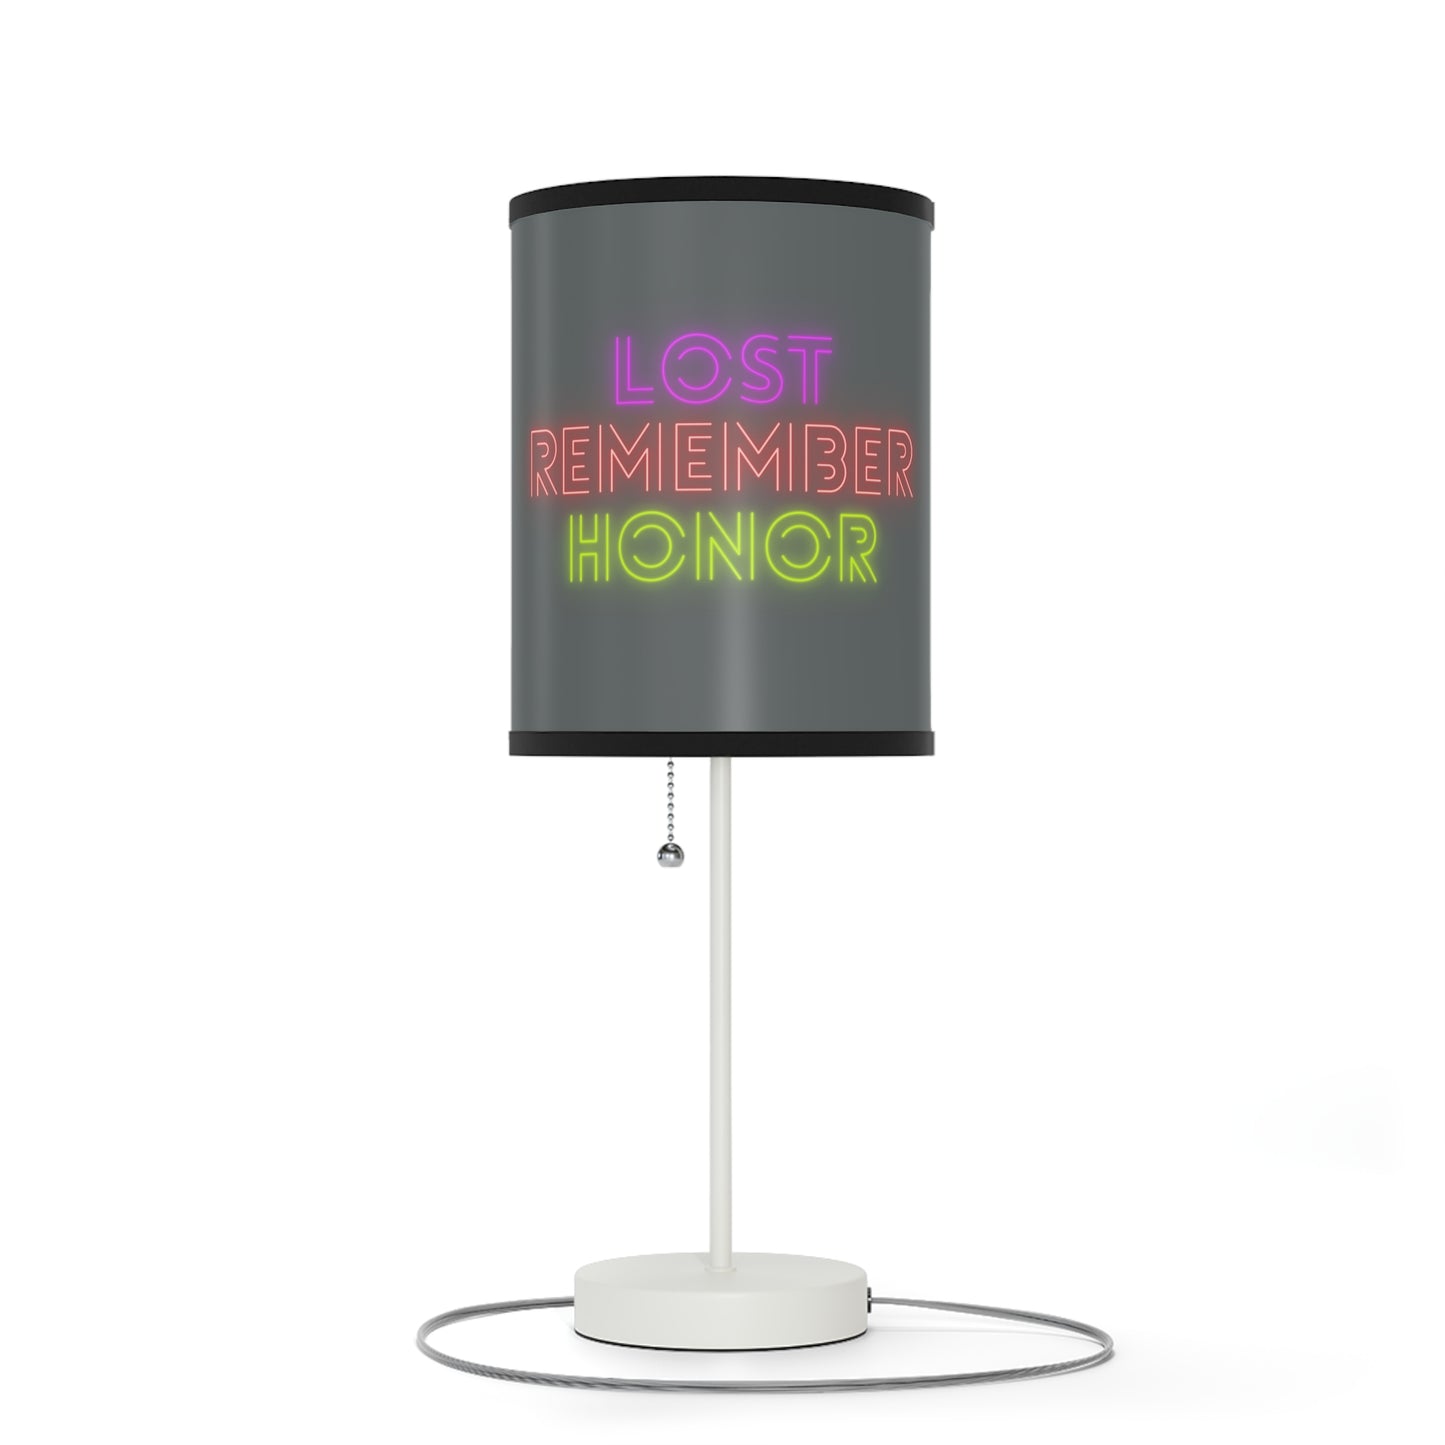 Lamp on a Stand, US|CA plug: Wolves Dark Grey